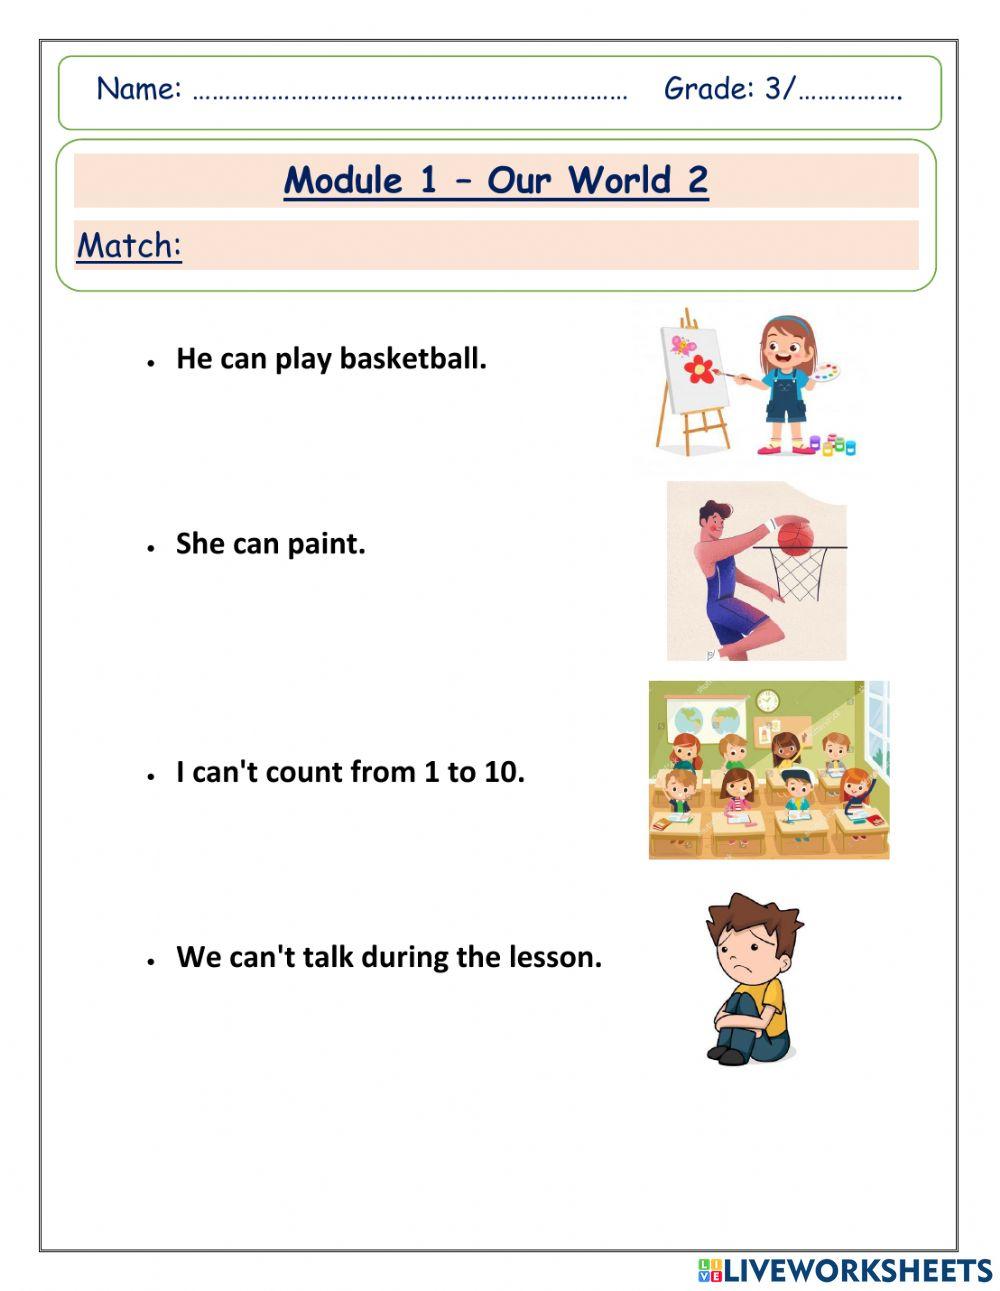 Grade 3 Module 1 Our World 2 (Can-Can't)